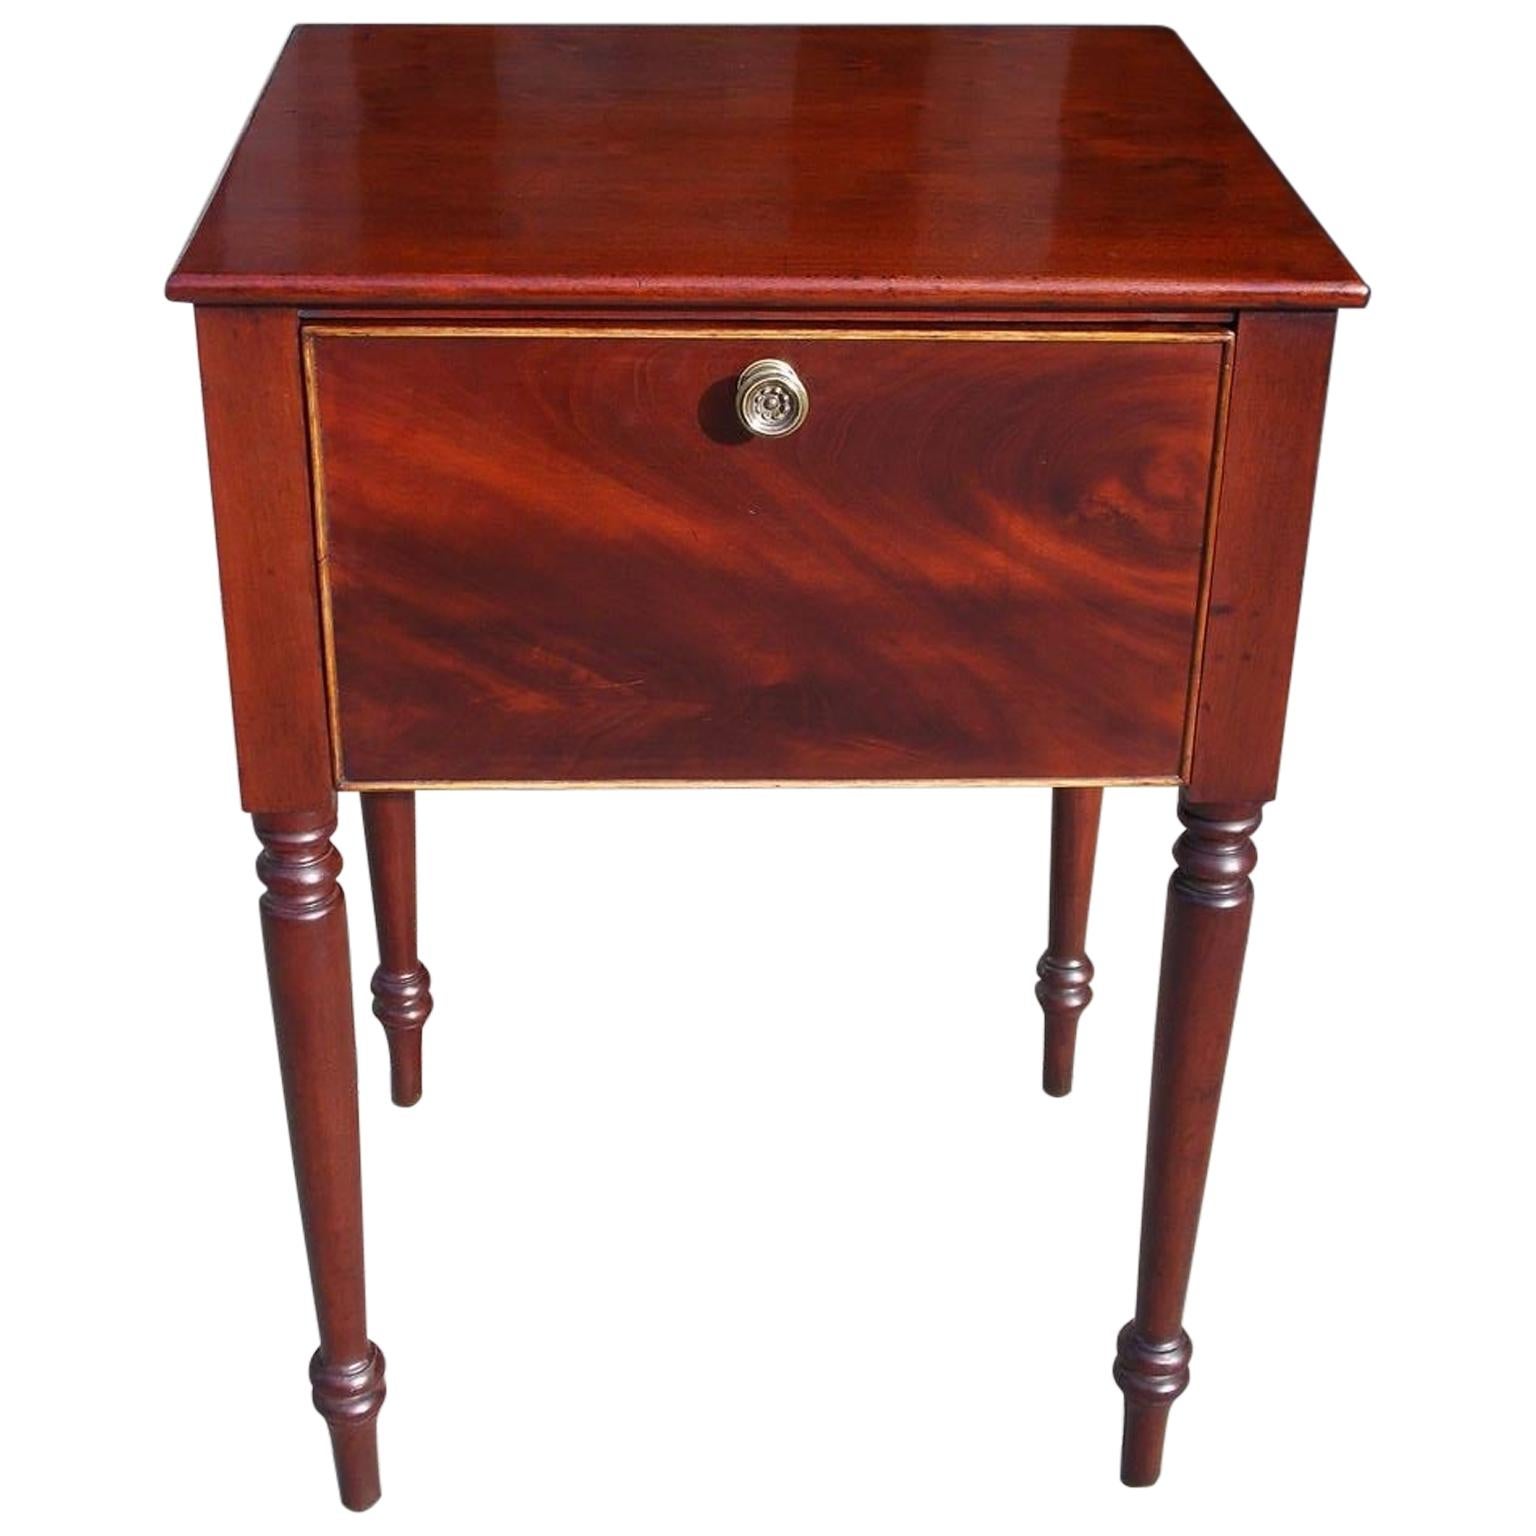 American Sheraton Mahogany Hinged Side Table with Turned Bulbous Legs, C. 1820